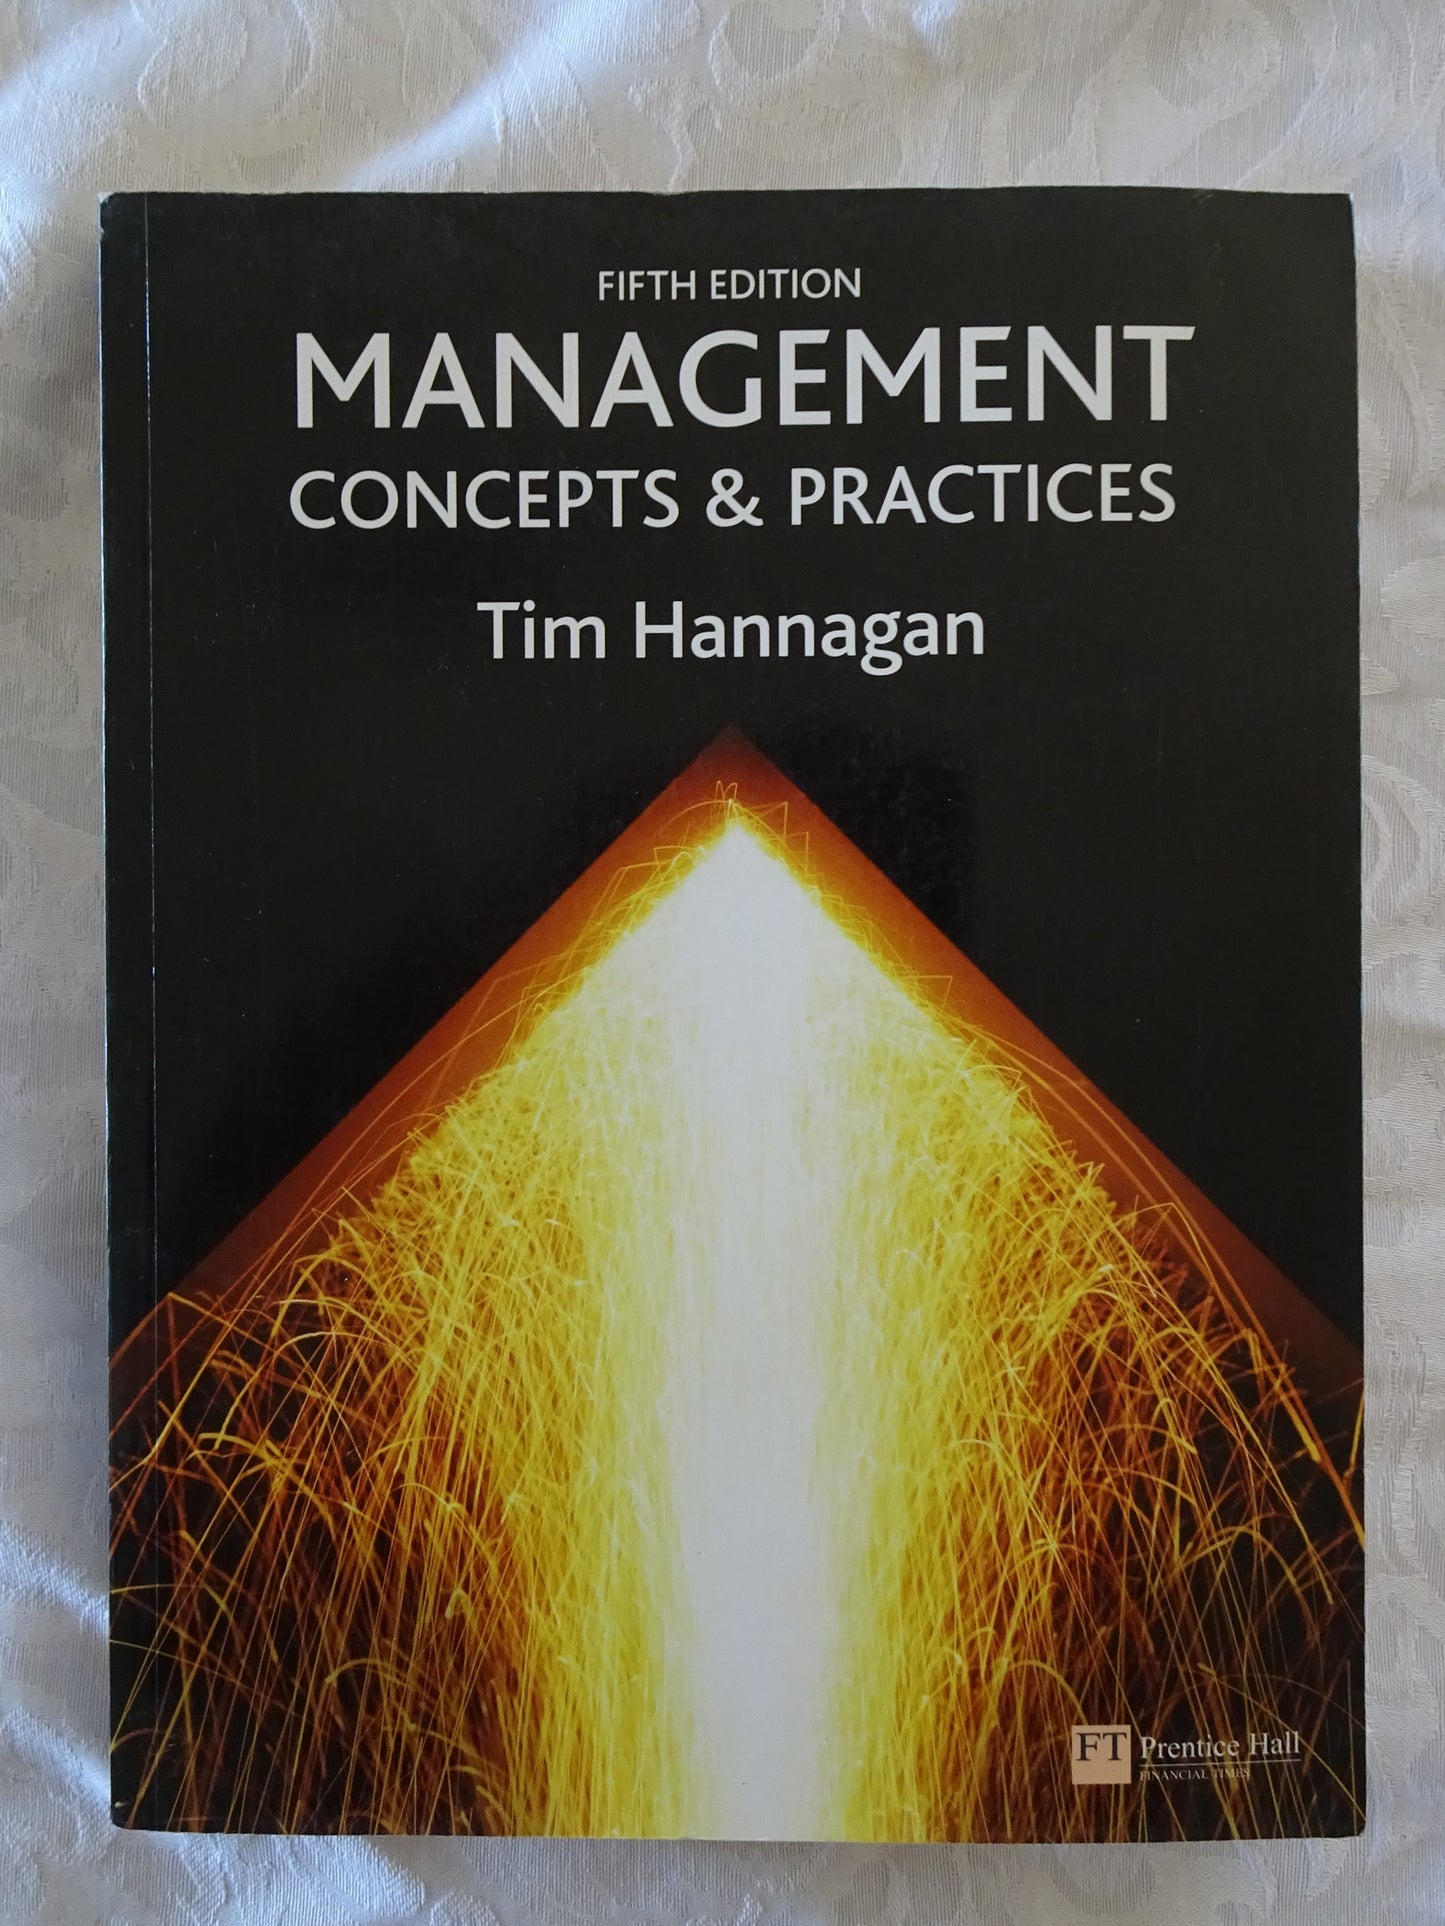 Management Concepts & Practices  Fifth Edition  by Tim Hannagan